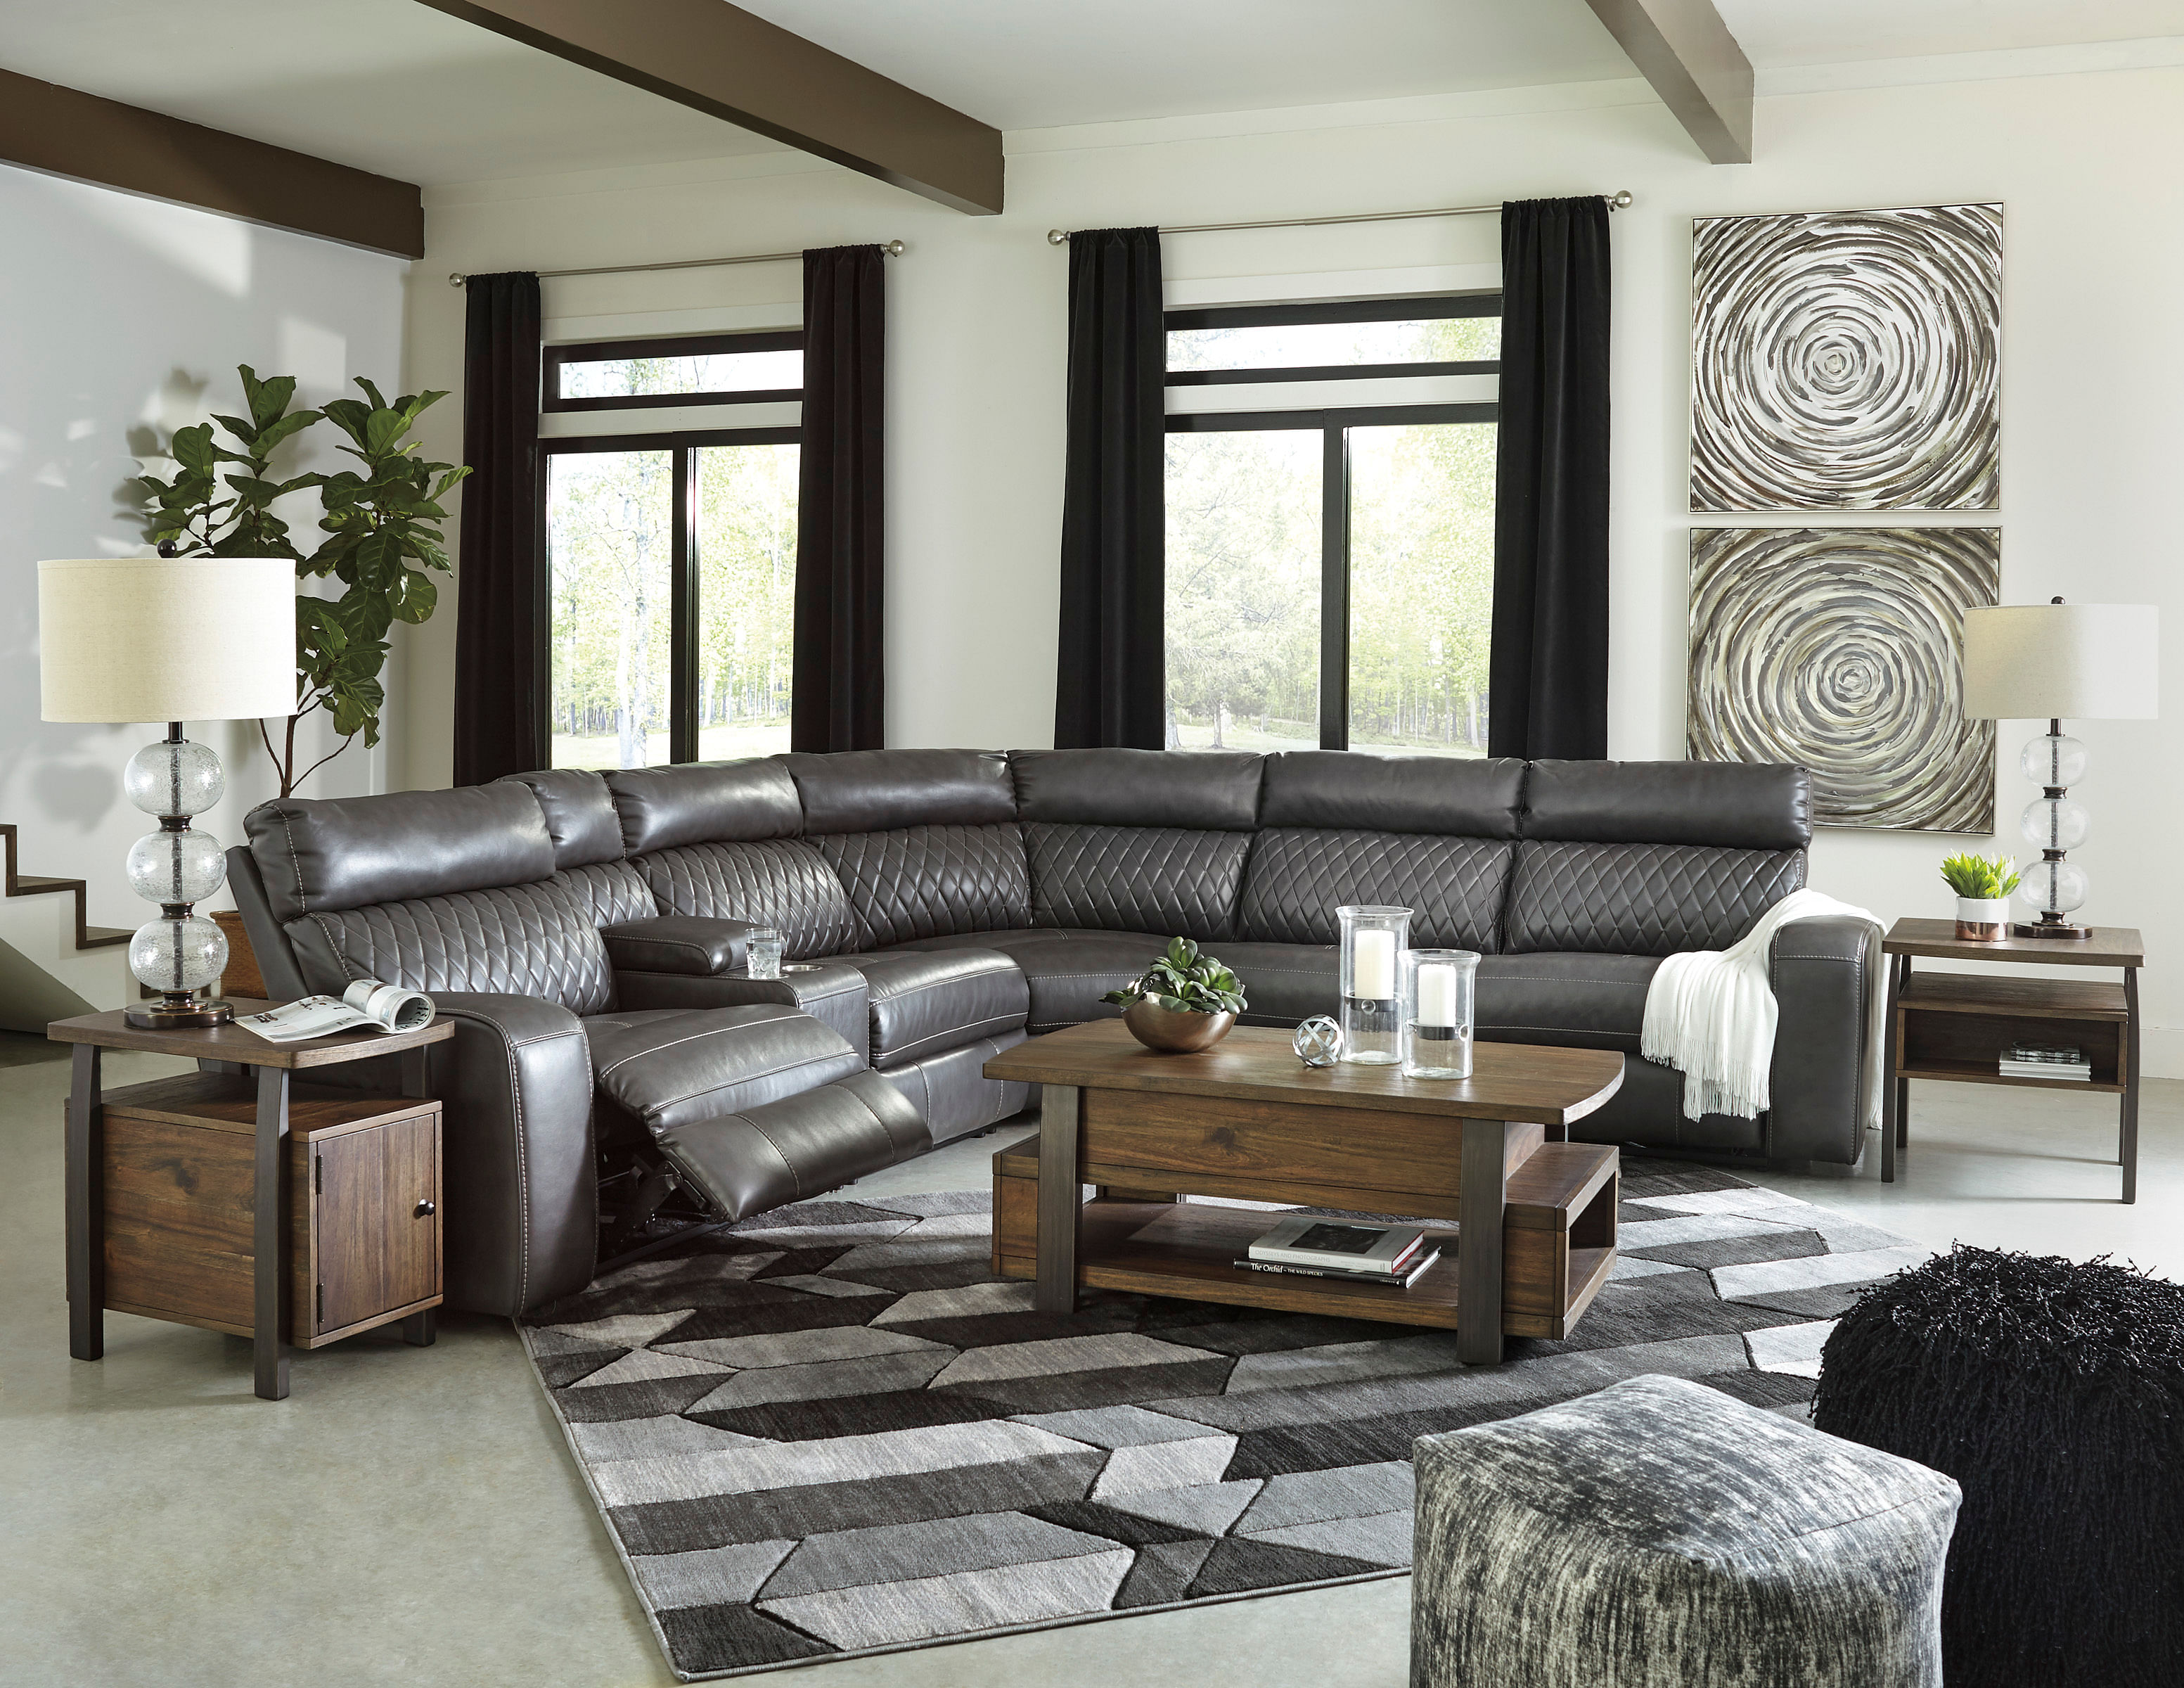 Ashley Furniture - Samperstone Reclining Sectional...